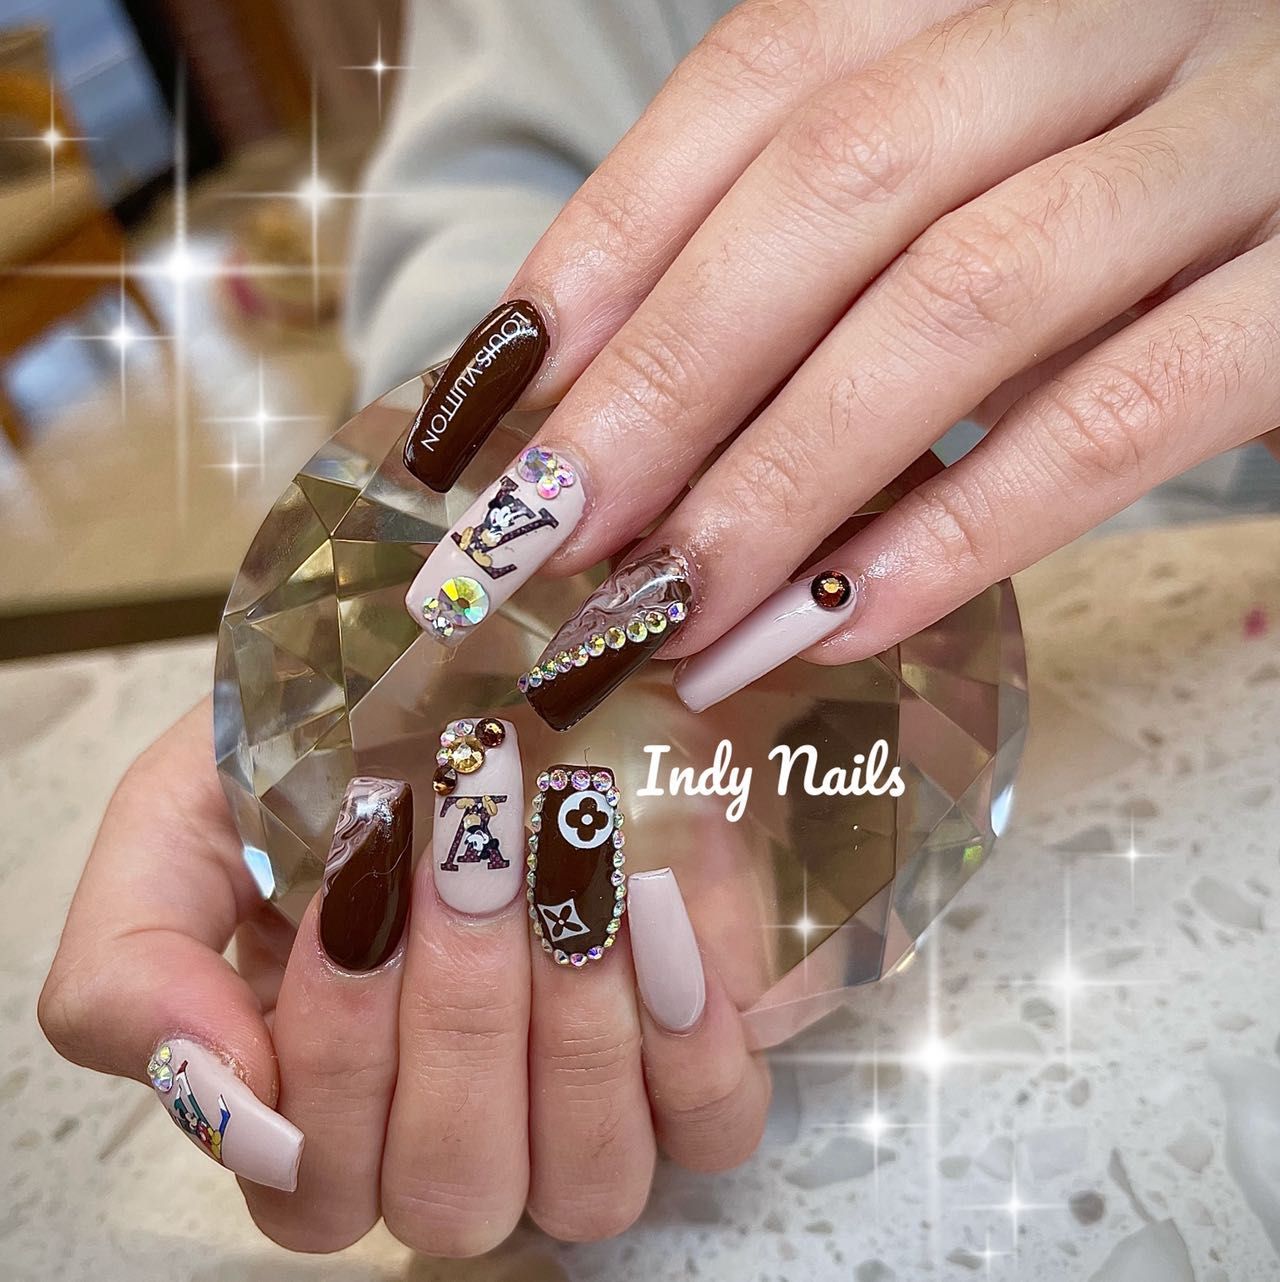 Indy Nails - Indianapolis - Book Online - Prices, Reviews, Photos